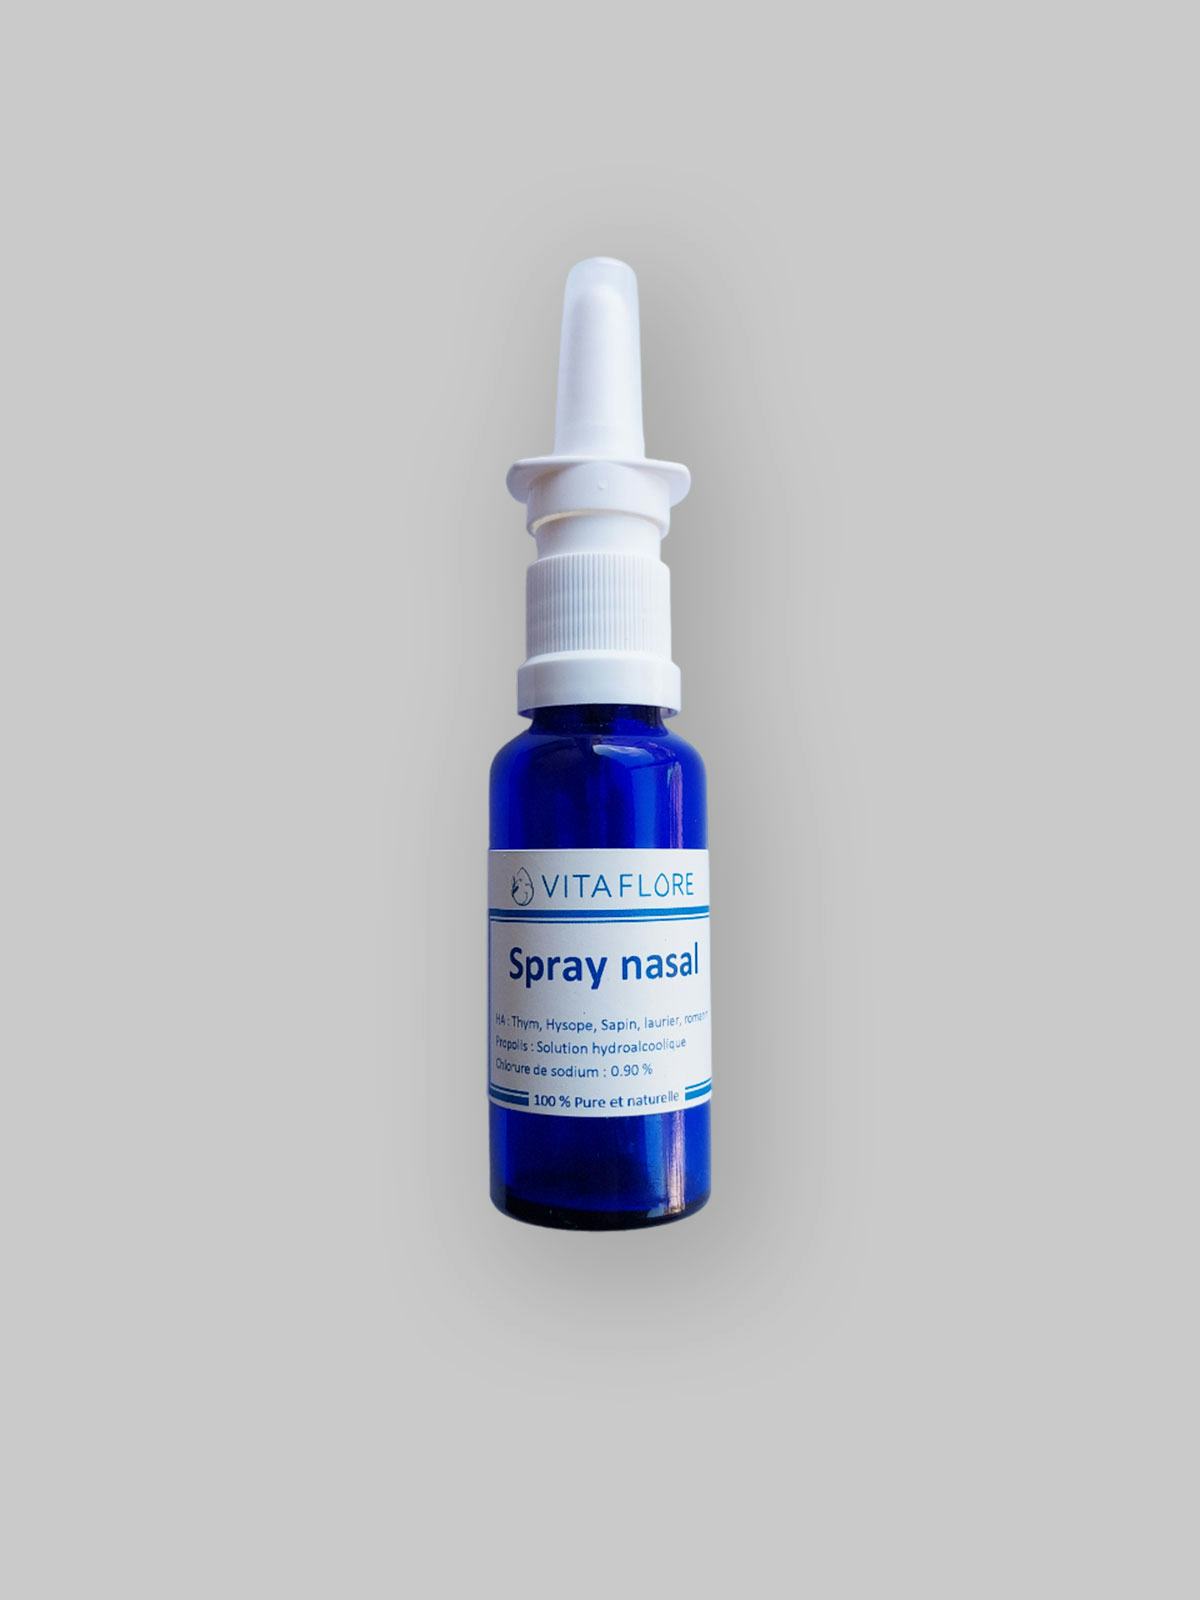 Spray nasal, artisanal product for direct sale in Switzerland